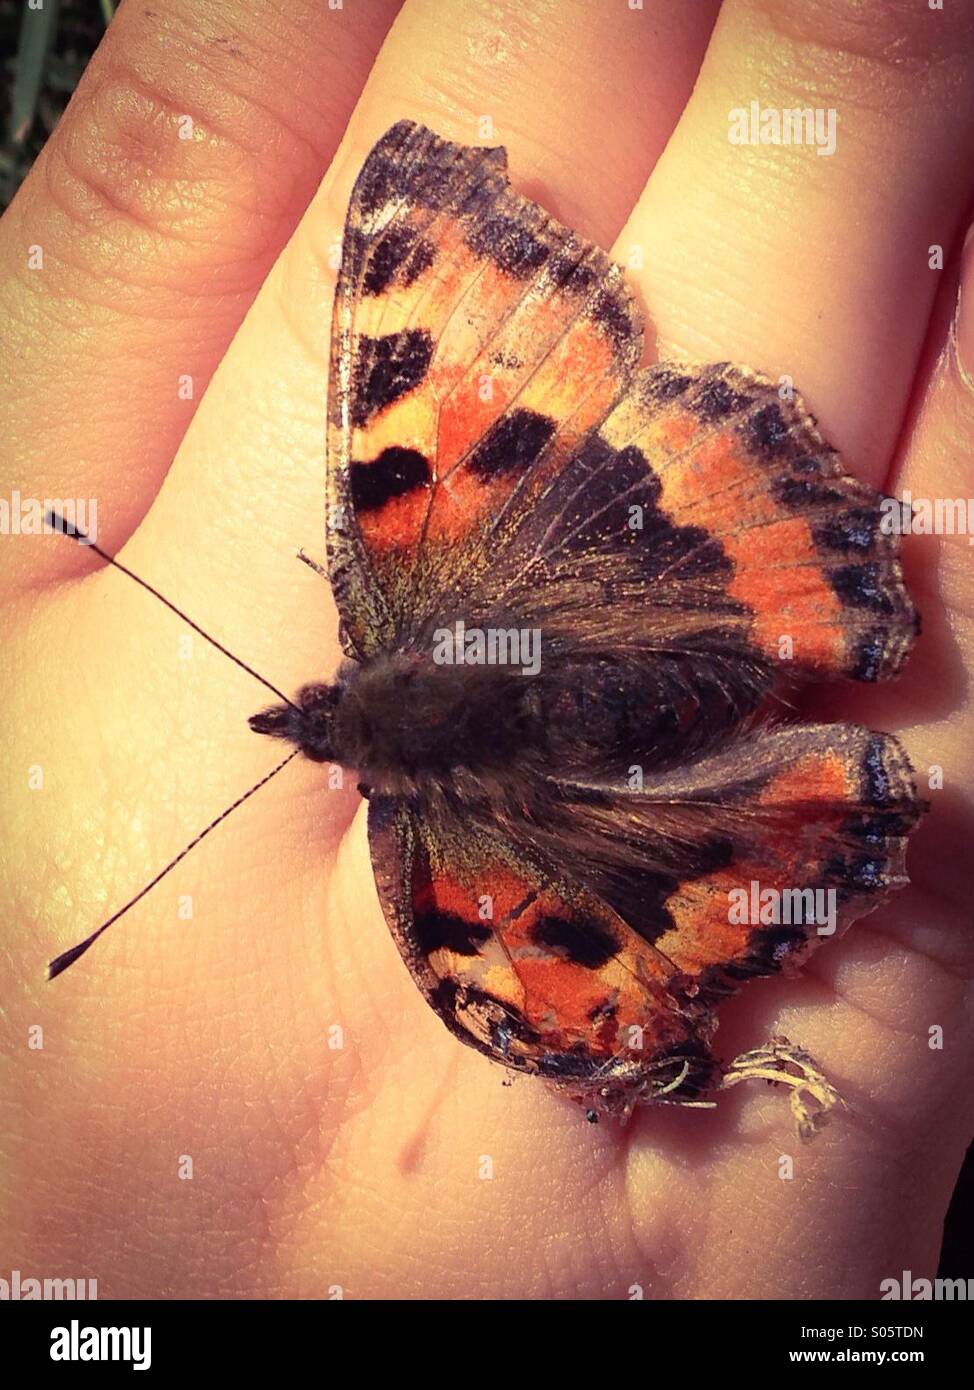 Injured butterfly on hand Stock Photo